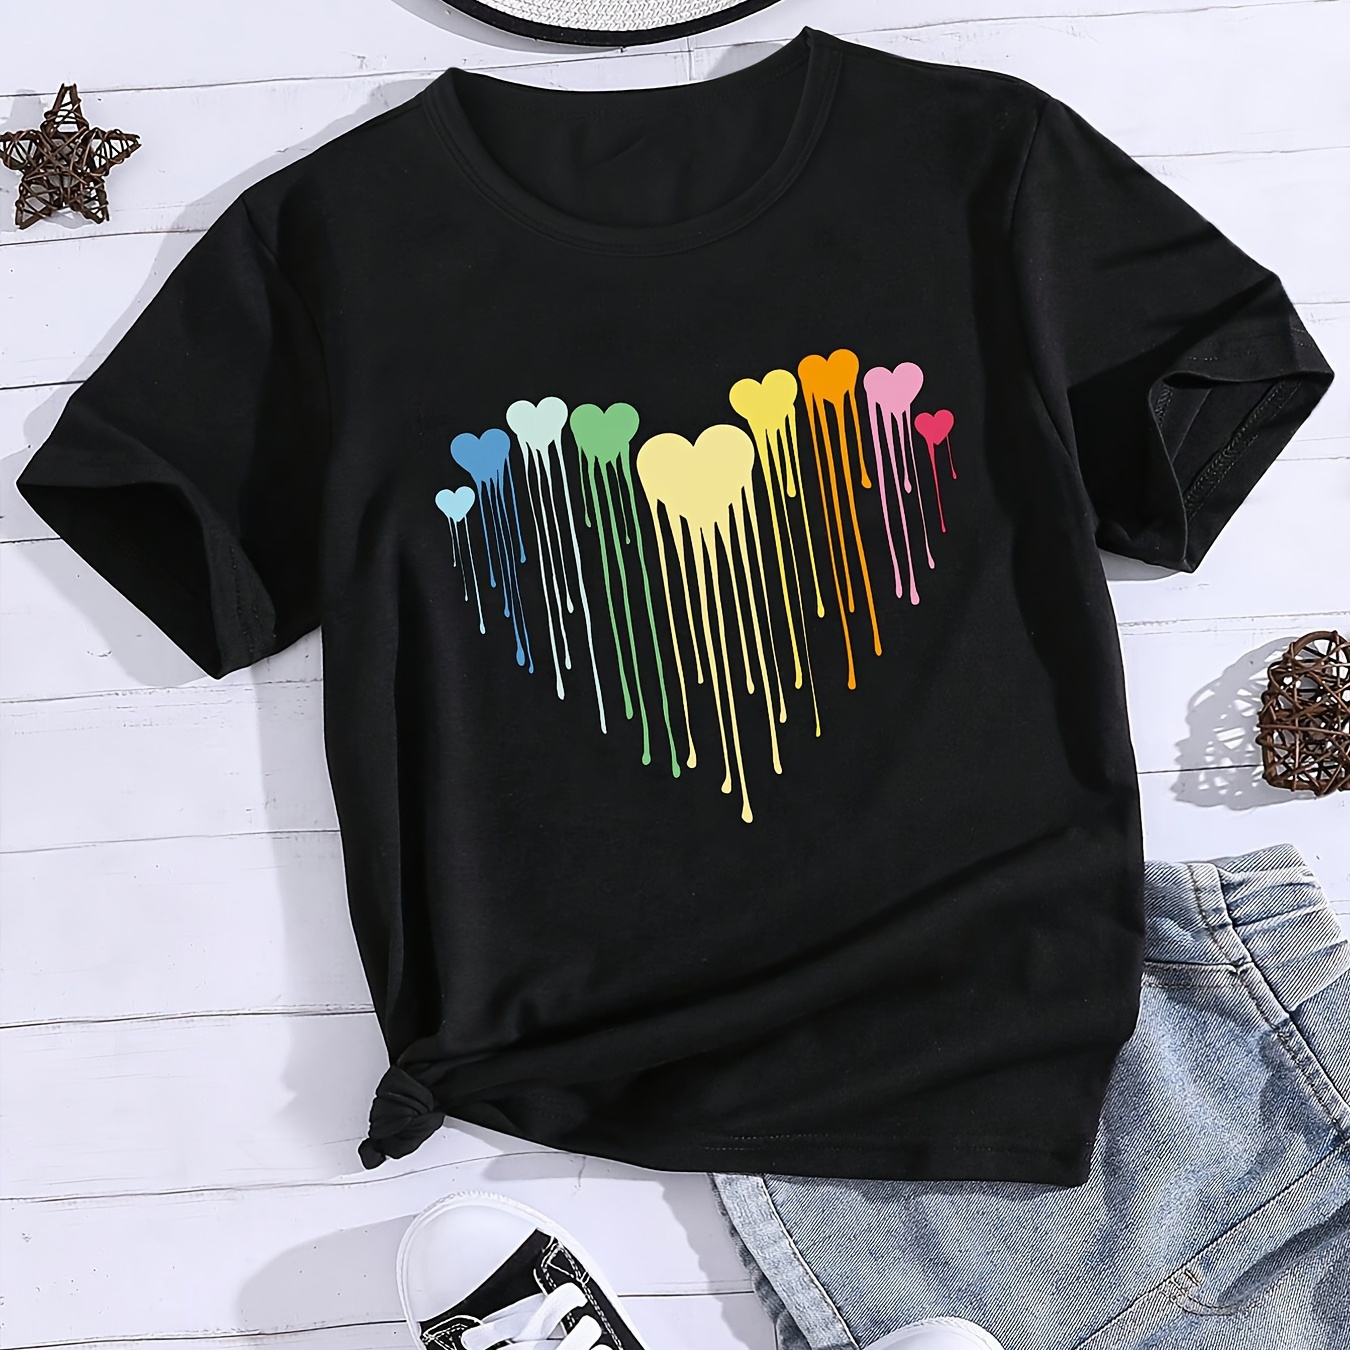 

Colorful Melting Hearts Graphic Print, Girls' Casual Crew Neck Short Sleeve T-shirt, Comfy Top Clothes For Spring And Summer For Outdoor Activities